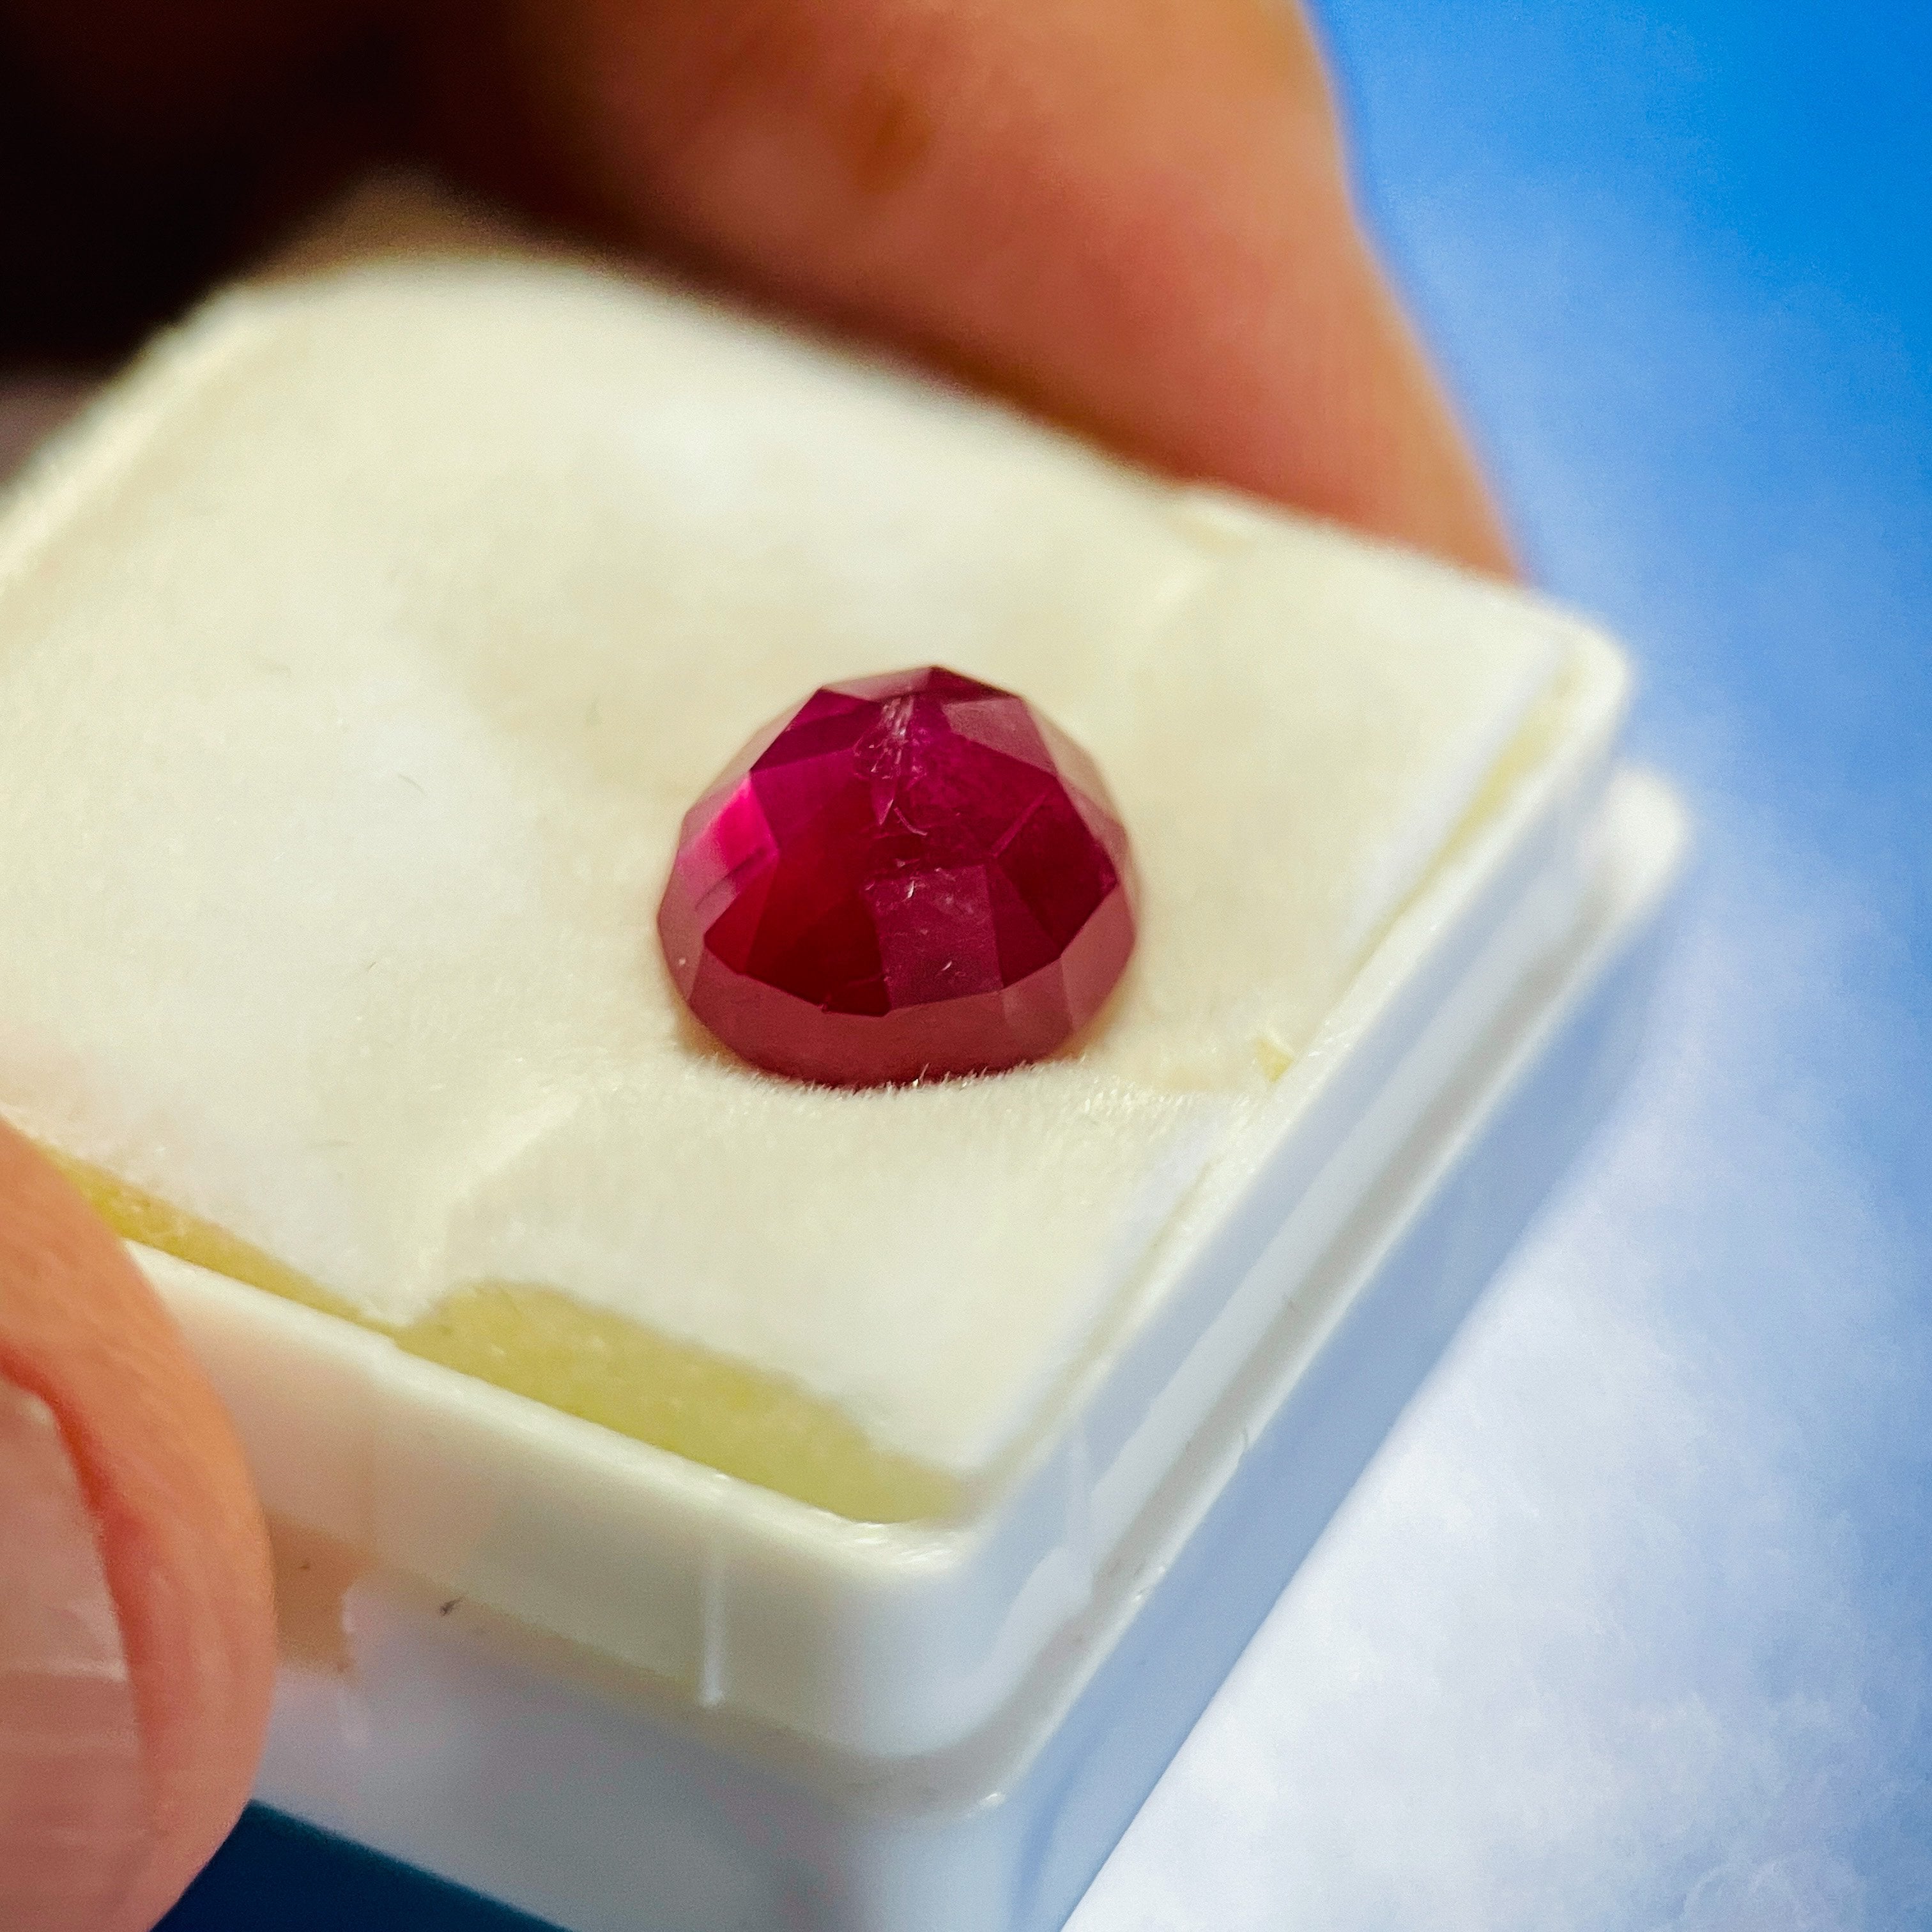 4.16Ct Ruby Faceted Cabochon/ Rose Cut Tanzania Untreated Unheated